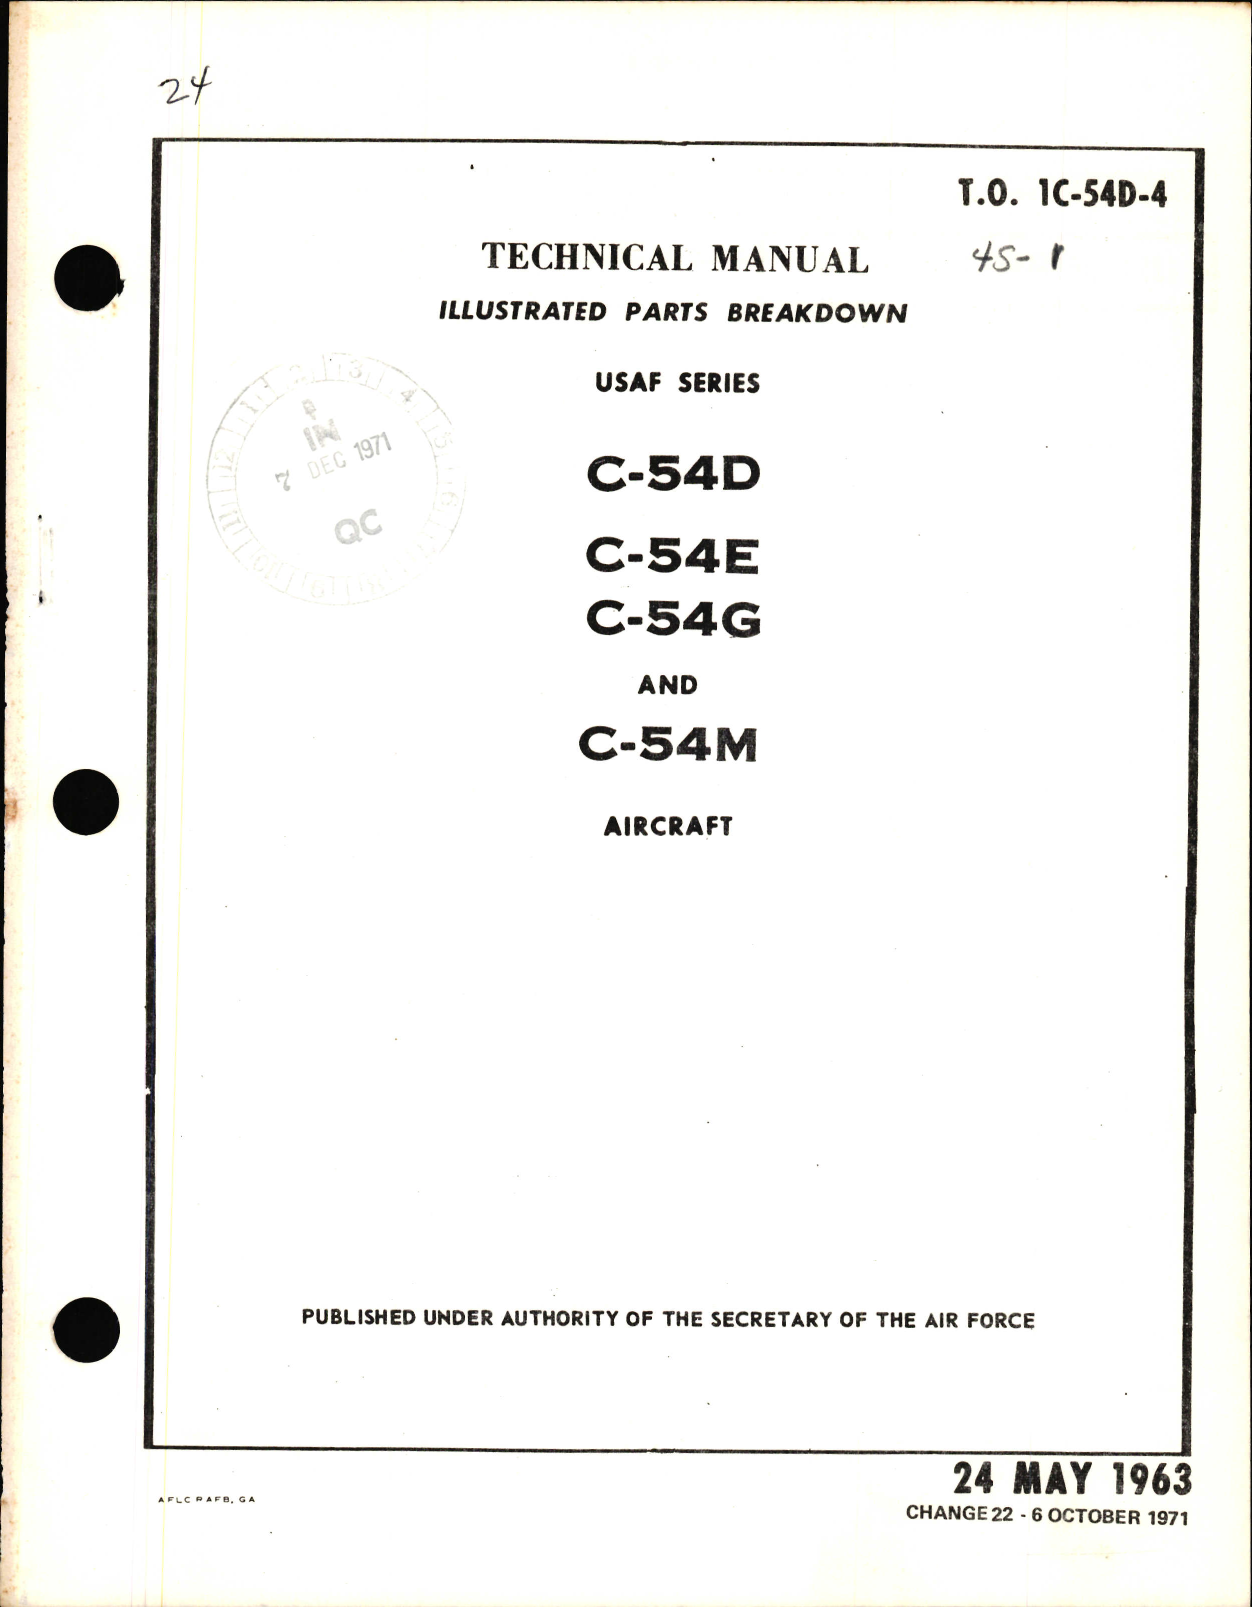 Sample page 1 from AirCorps Library document: Illustrated Parts Breakdown for C-54D, C-54E, C-54G, and C-54M